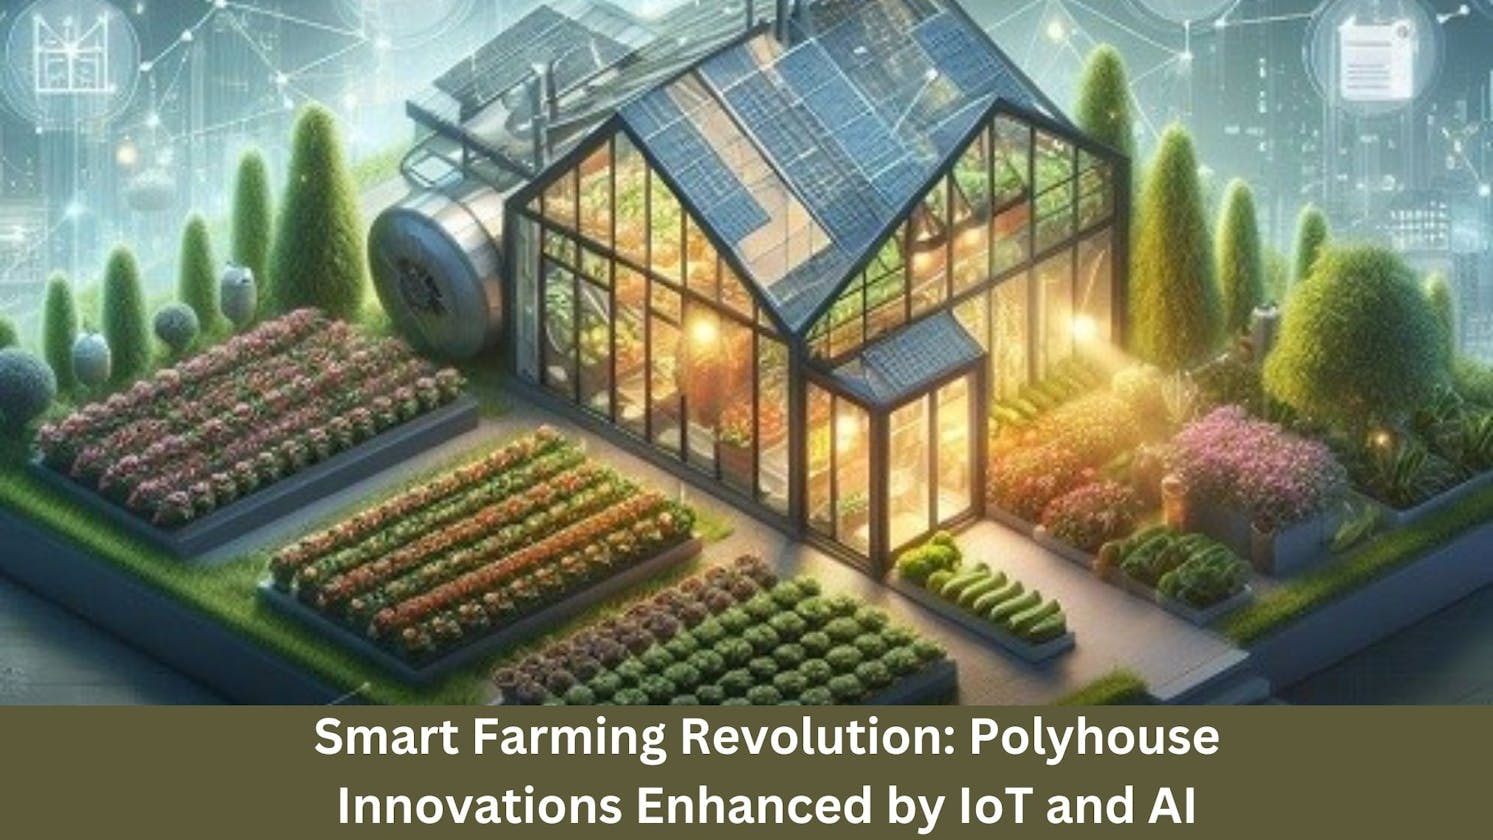 Smart Farming Revolution: Polyhouse Innovations Enhanced by IoT and AI